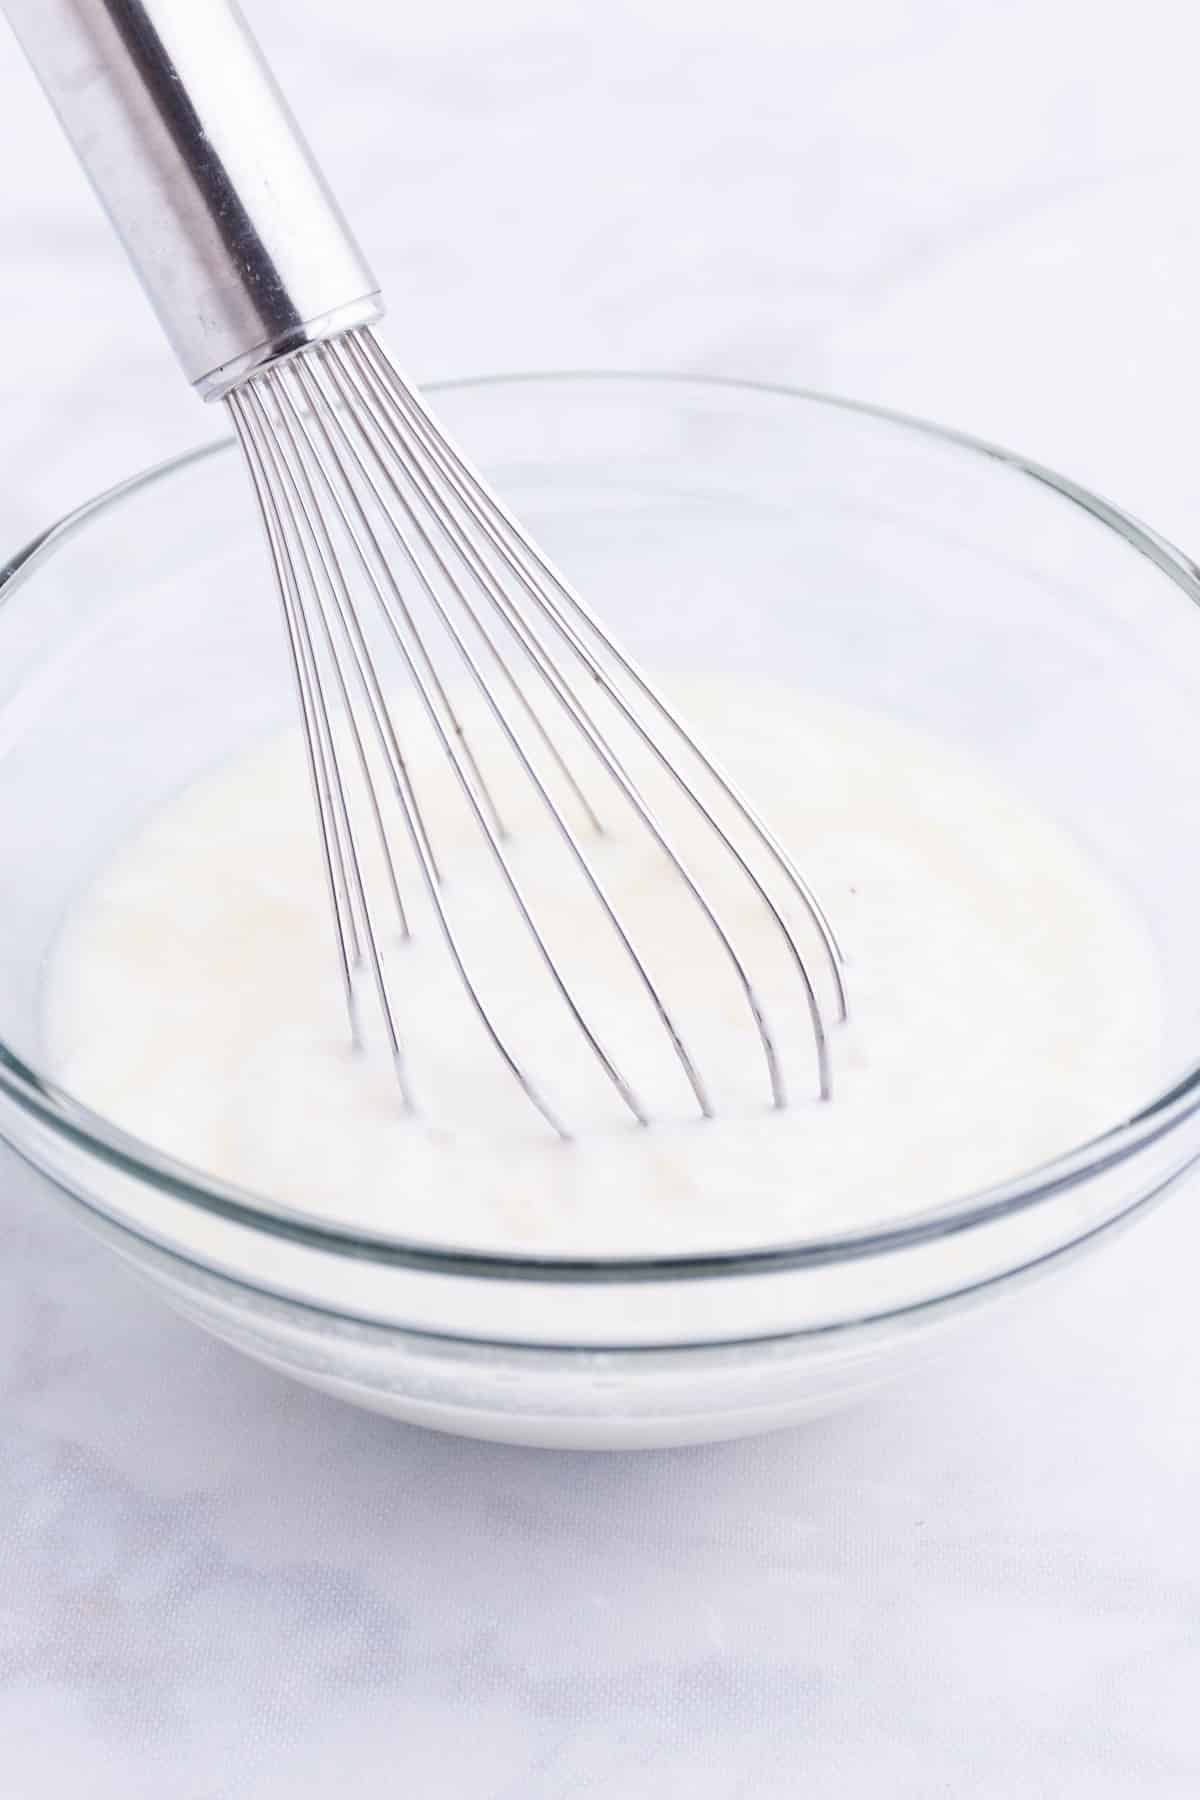 A yogurt sauce is whisked together.